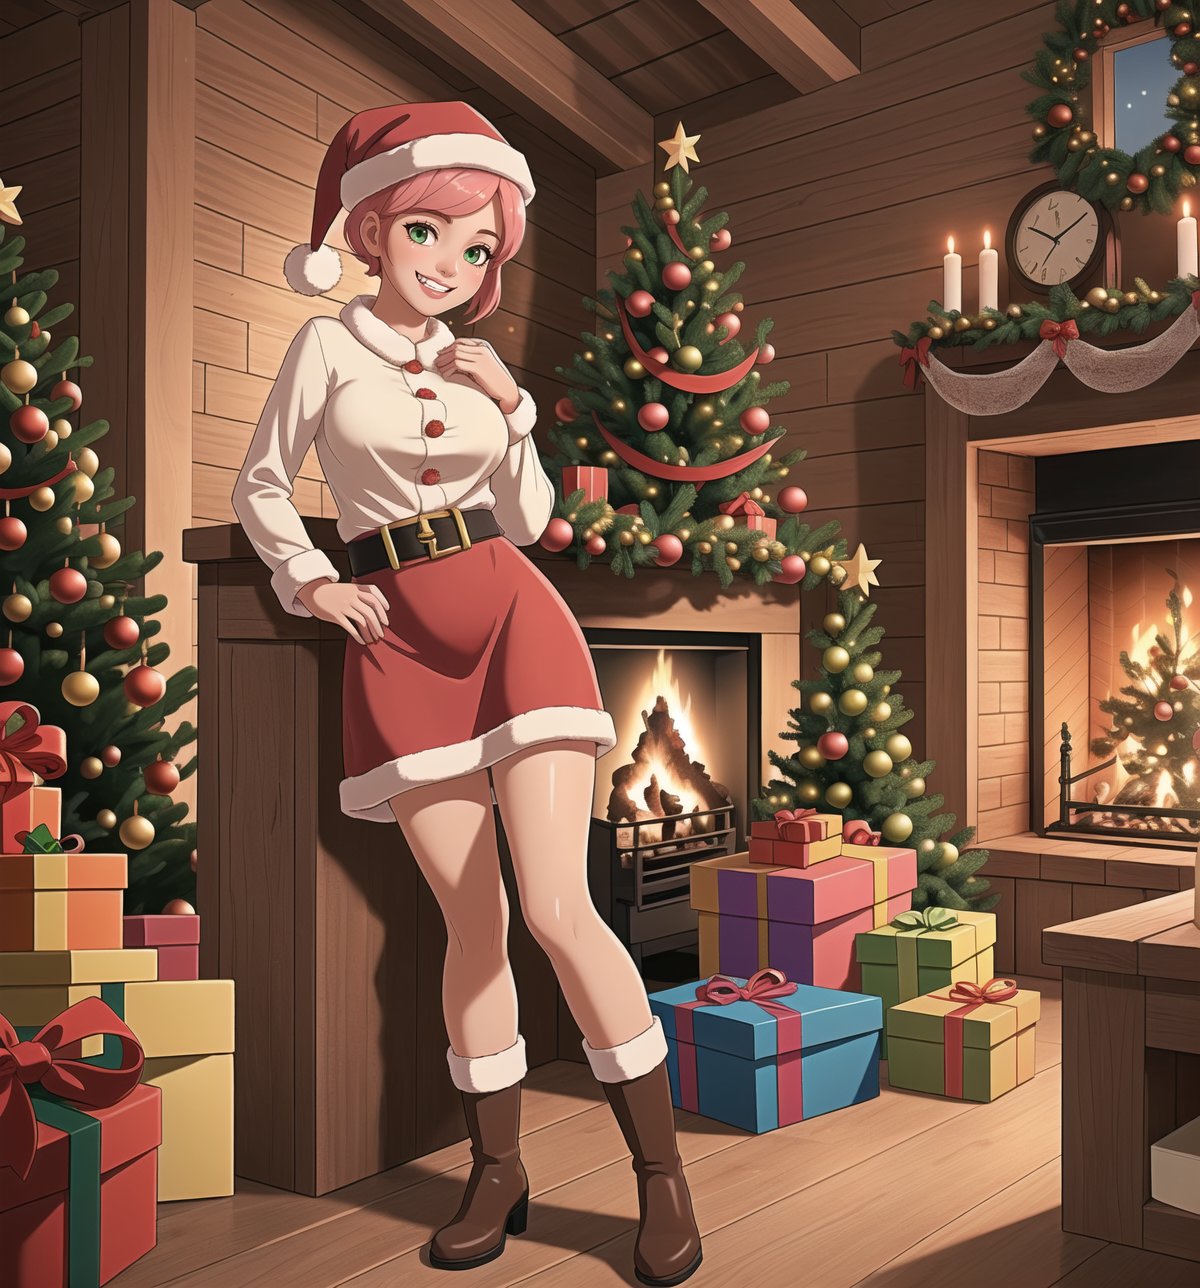 A razor-sharp 4K masterpiece with a warm, realistic style, rendered in ultra-high resolution with graphic detail. | A young 24-year-old woman, with short pink hair and two long pigtails, is dressed in a Santa Claus costume, consisting of a red blouse with white details, a red skirt, red and white striped socks, black boots and a hat Santa Claus with luminous clips. She has green eyes, she is looking at the viewer, while ((smiles, showing her teeth)). She finds herself inside a cozy wooden house, with wooden structures, a chimney, comfortable furniture and a beautiful decorated Christmas tree. The warm light of the fireplace and the twinkling lights of the Christmas tree create a cozy and festive atmosphere, highlighting the details of the scene. | The image highlights the woman's figure, her clothes and accessories, as well as the elements of the wooden house around her. The details of the wood, chimney, furniture and decorations add realism to the image. | Soft, warm lighting effects create a cozy, Christmas-spirited atmosphere, while detailed textures on fur and fabrics add realism to the image. | A warm and festive scene of a young woman as Santa Claus in a wooden house, exploring themes of comfort, joy and Christmas spirit. | (((((The image reveals a full-body shot as she strikes a sensual pose, engagingly leaning against a structure within the scene in a thrilling manner. As she leans back, she assumes a sensual pose, leaning against the structure and reclining in an exciting way.))))). | ((full-body shot)), ((perfect pose)), ((perfect fingers, better hands, perfect hands)), ((perfect legs, perfect feet)), ((huge breasts)), ((perfect design)), ((perfect composition)), ((very detailed scene, very detailed background, perfect layout, correct imperfections)), More Detail, Enhance